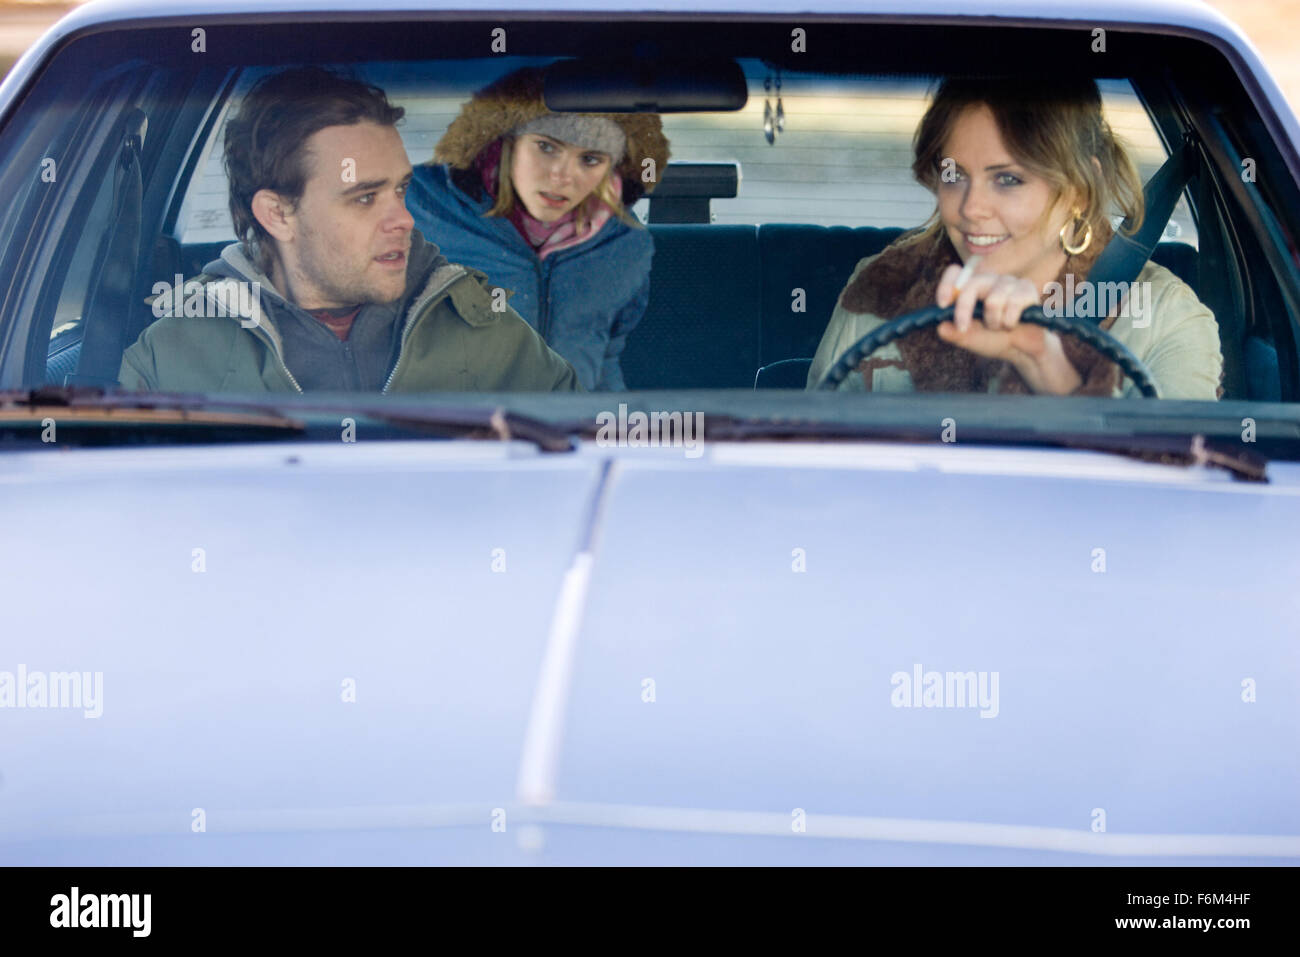 RELEASE DATE: March 14, 2008. MOVIE TITLE: Sleepwalking. STUDIO: FilmEngine. PLOT: The drama follows an 11-year-old girl's struggle to come to terms with her mother's abandonment. PICTURED: NICK STAHL as James, ANNASOPHIA ROBB as Tara and CHARLIZE THERON as Joleen. Stock Photo